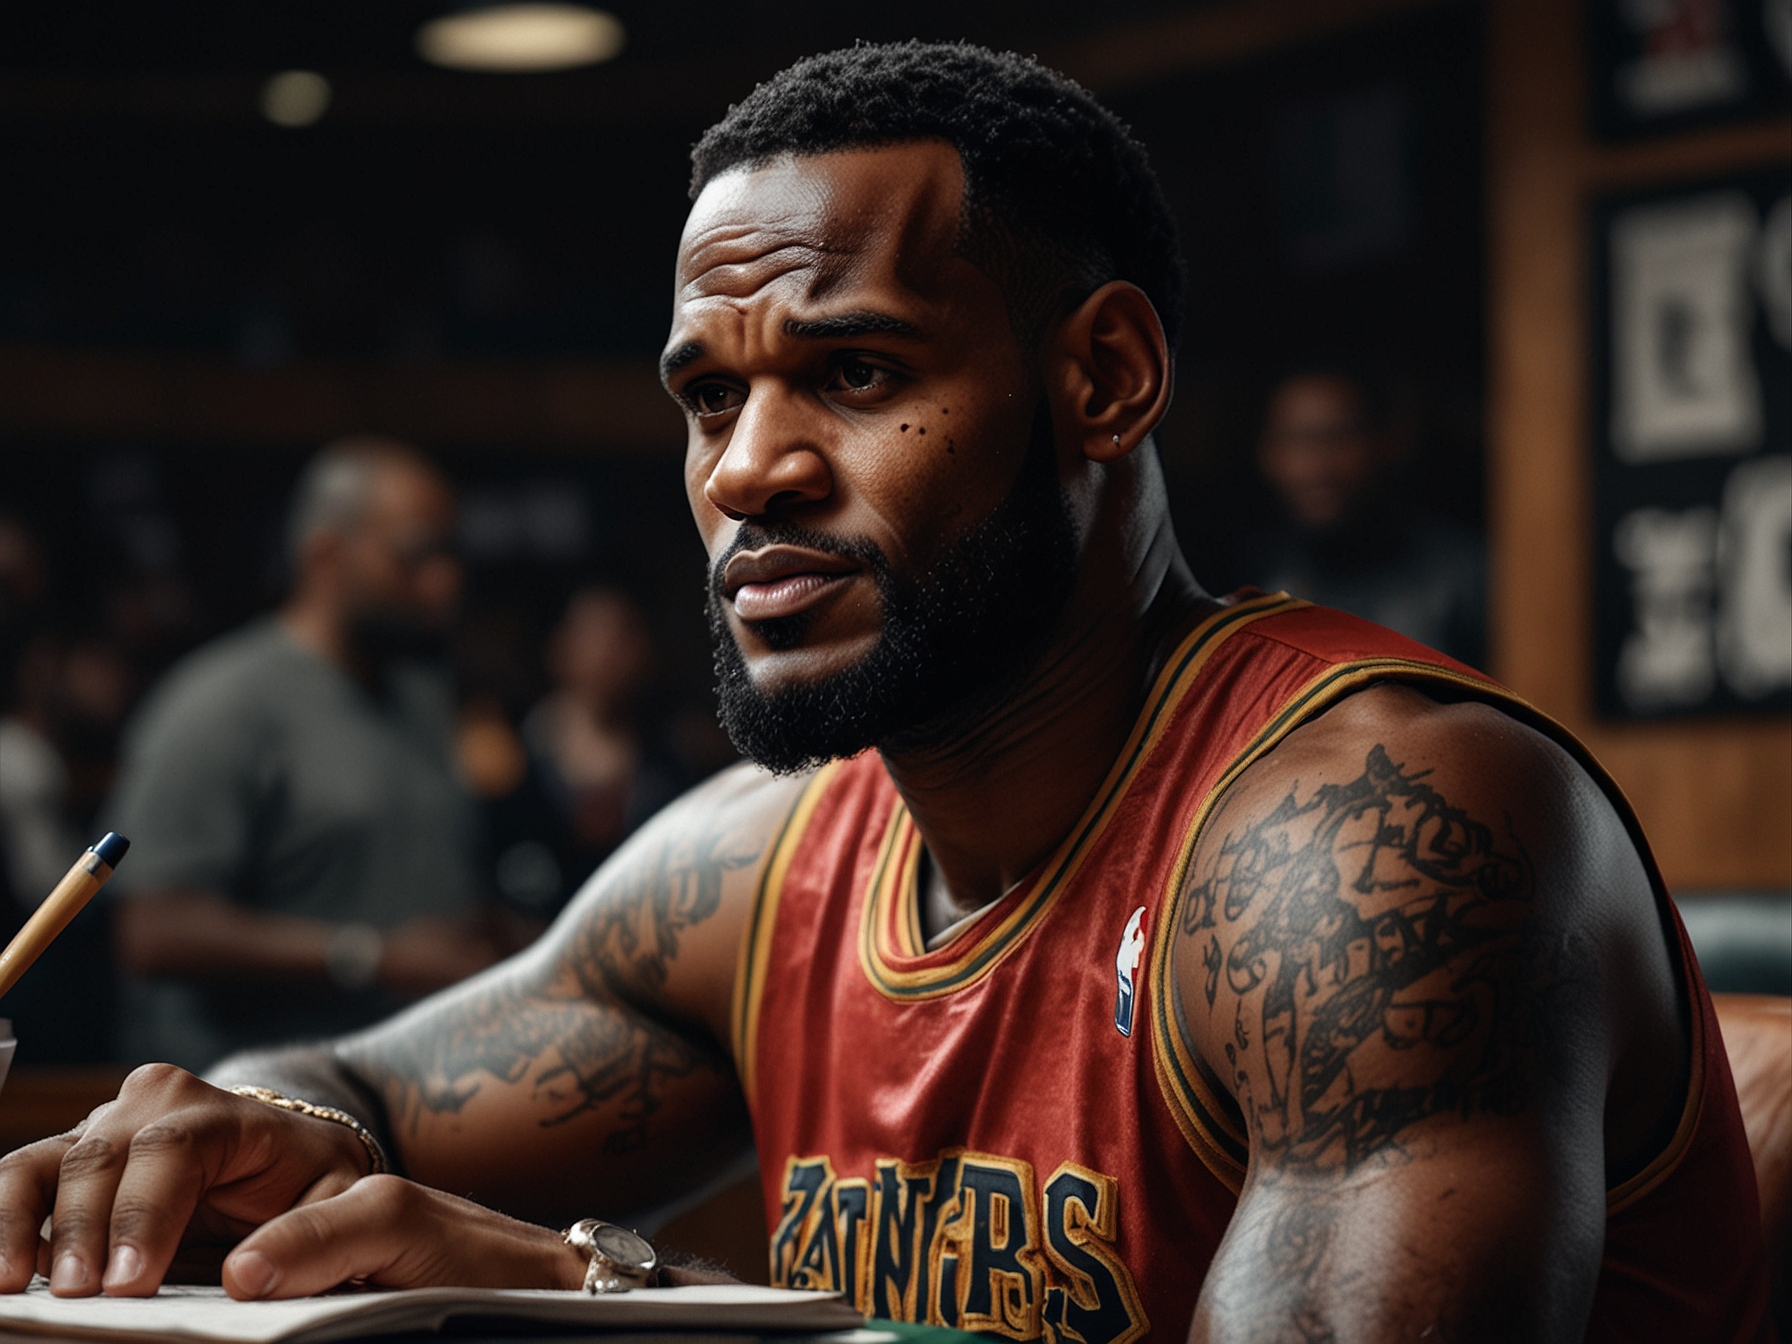 LeBron James recording an episode of 'The King’s Court' podcast, deeply immersed in conversation, showcasing his engagement with sports, culture, and personal growth topics.